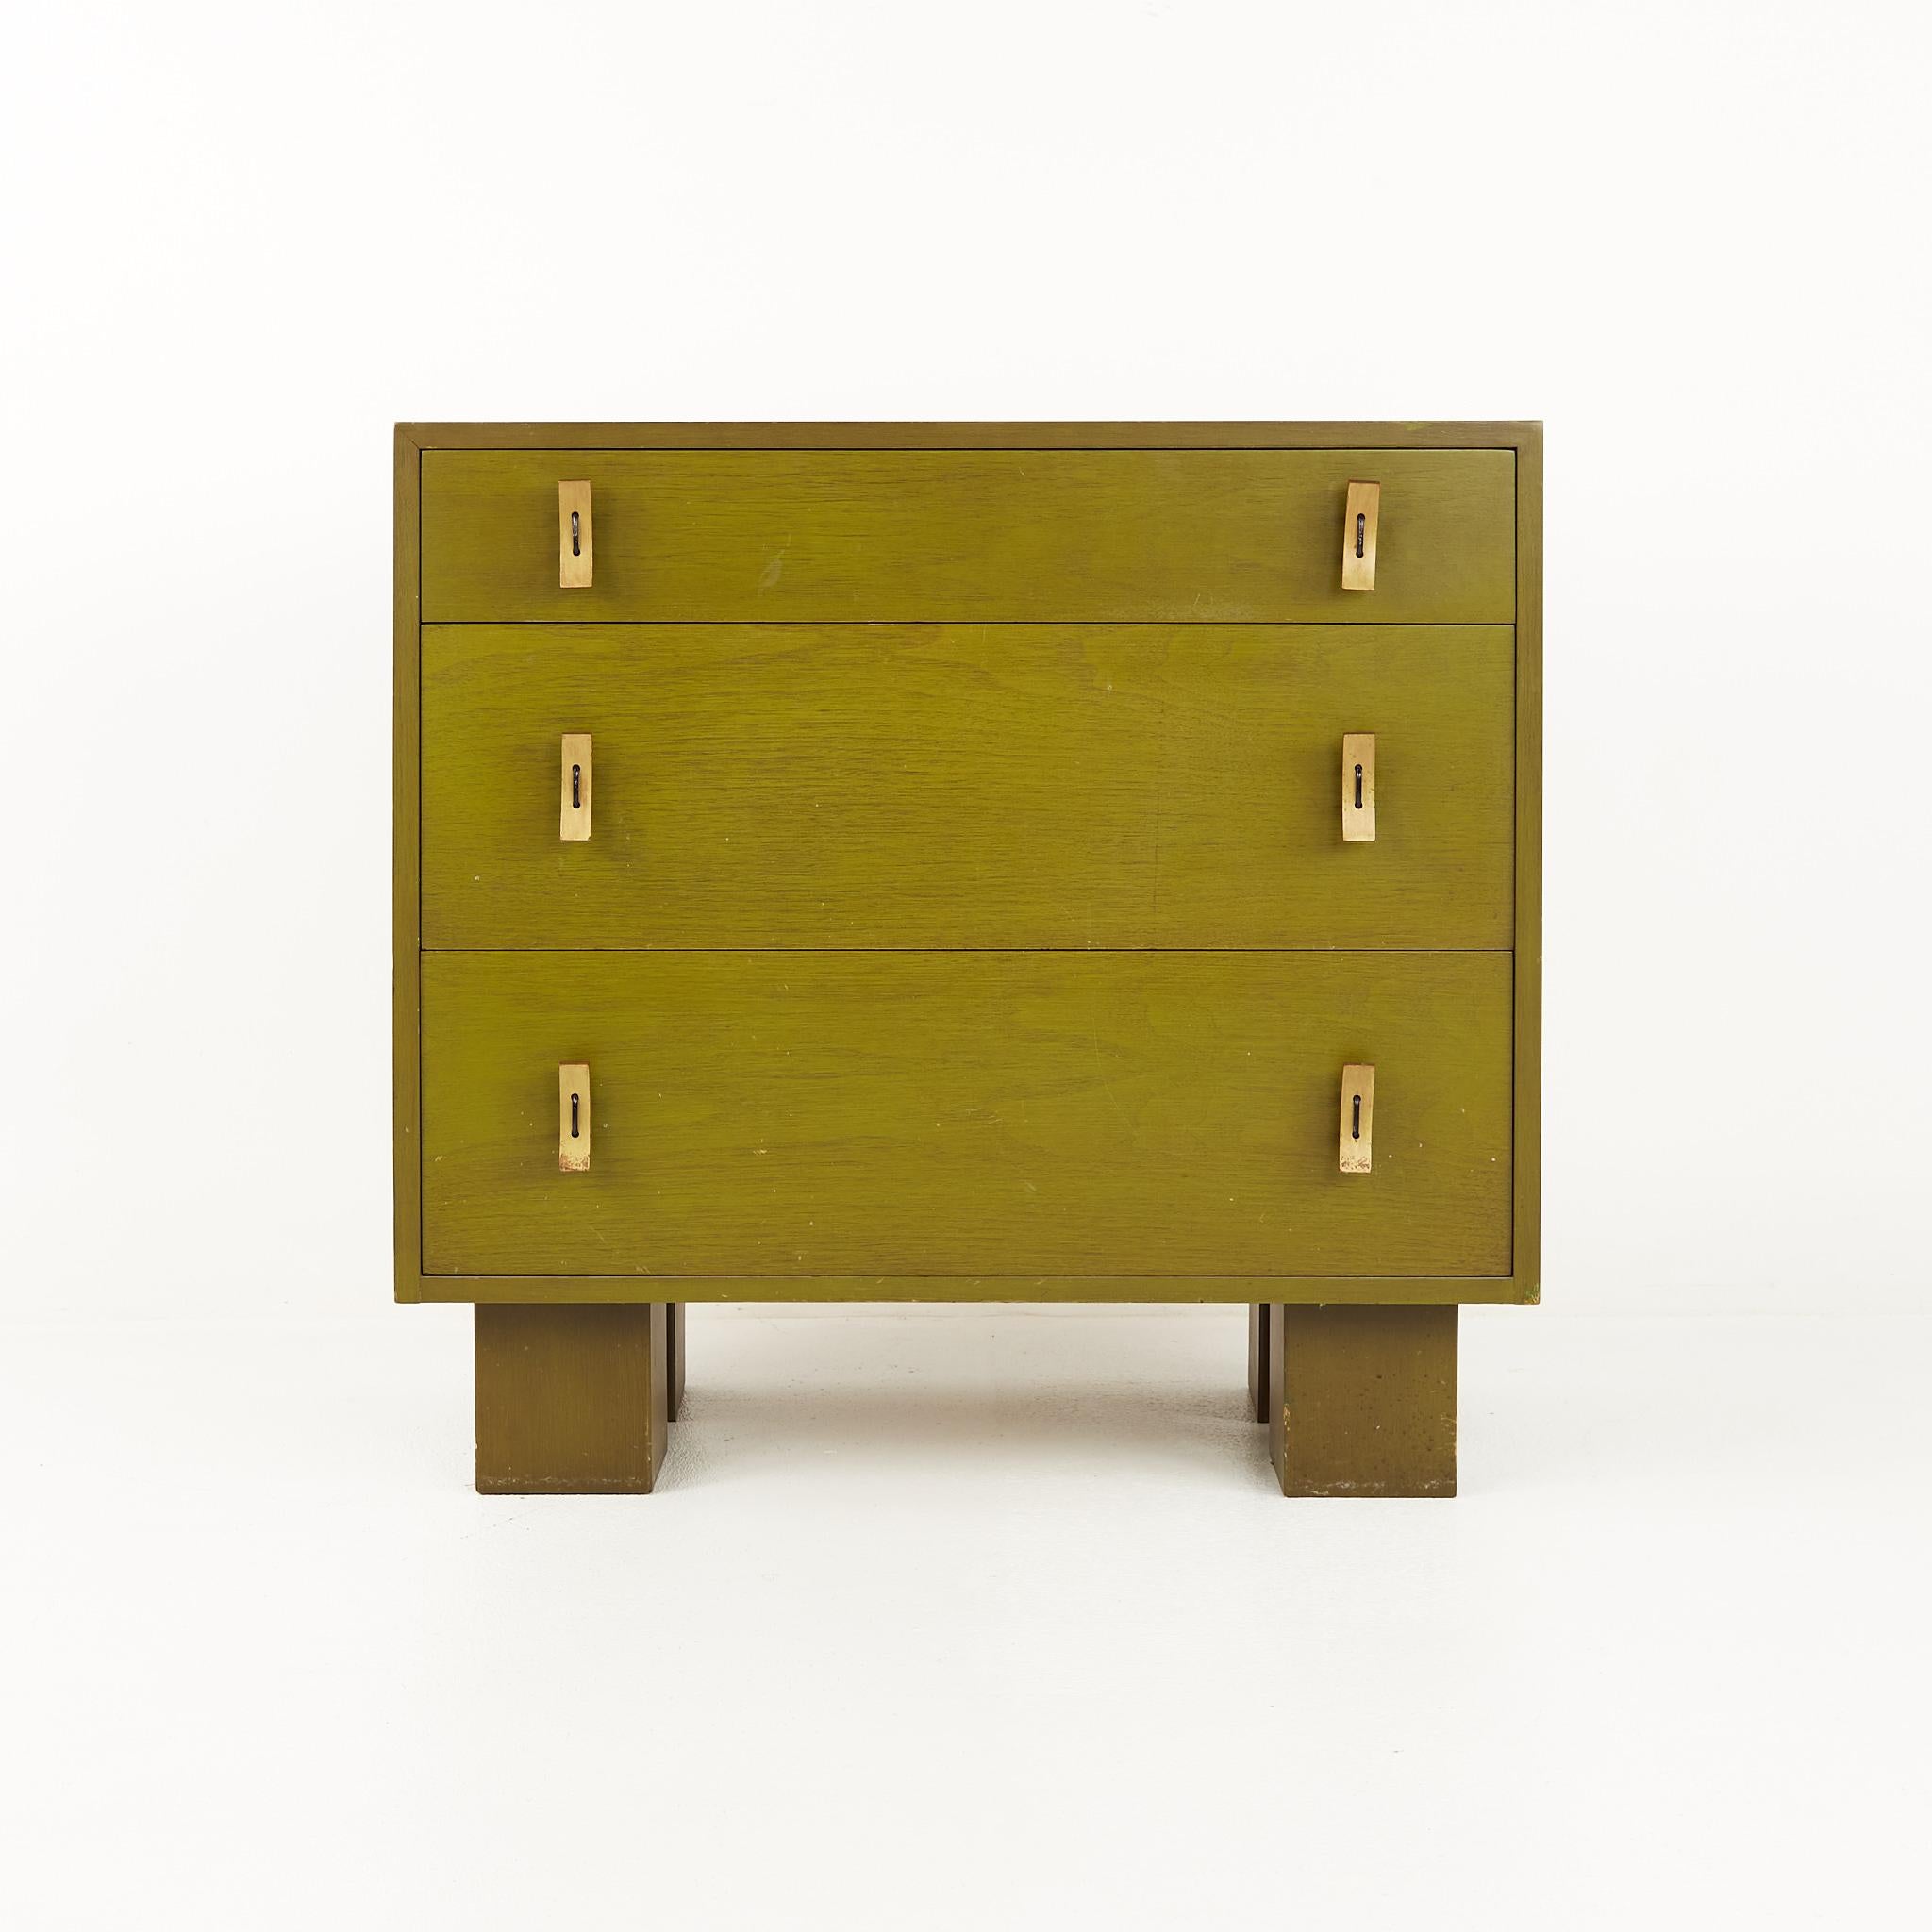 Stanley Young for Glenn of California Mid Century Green 3 drawer chest

The chest of drawers measures: 32.75 wide x 19 deep x 31.25 inches high

All pieces of furniture can be had in what we call restored vintage condition. That means the piece